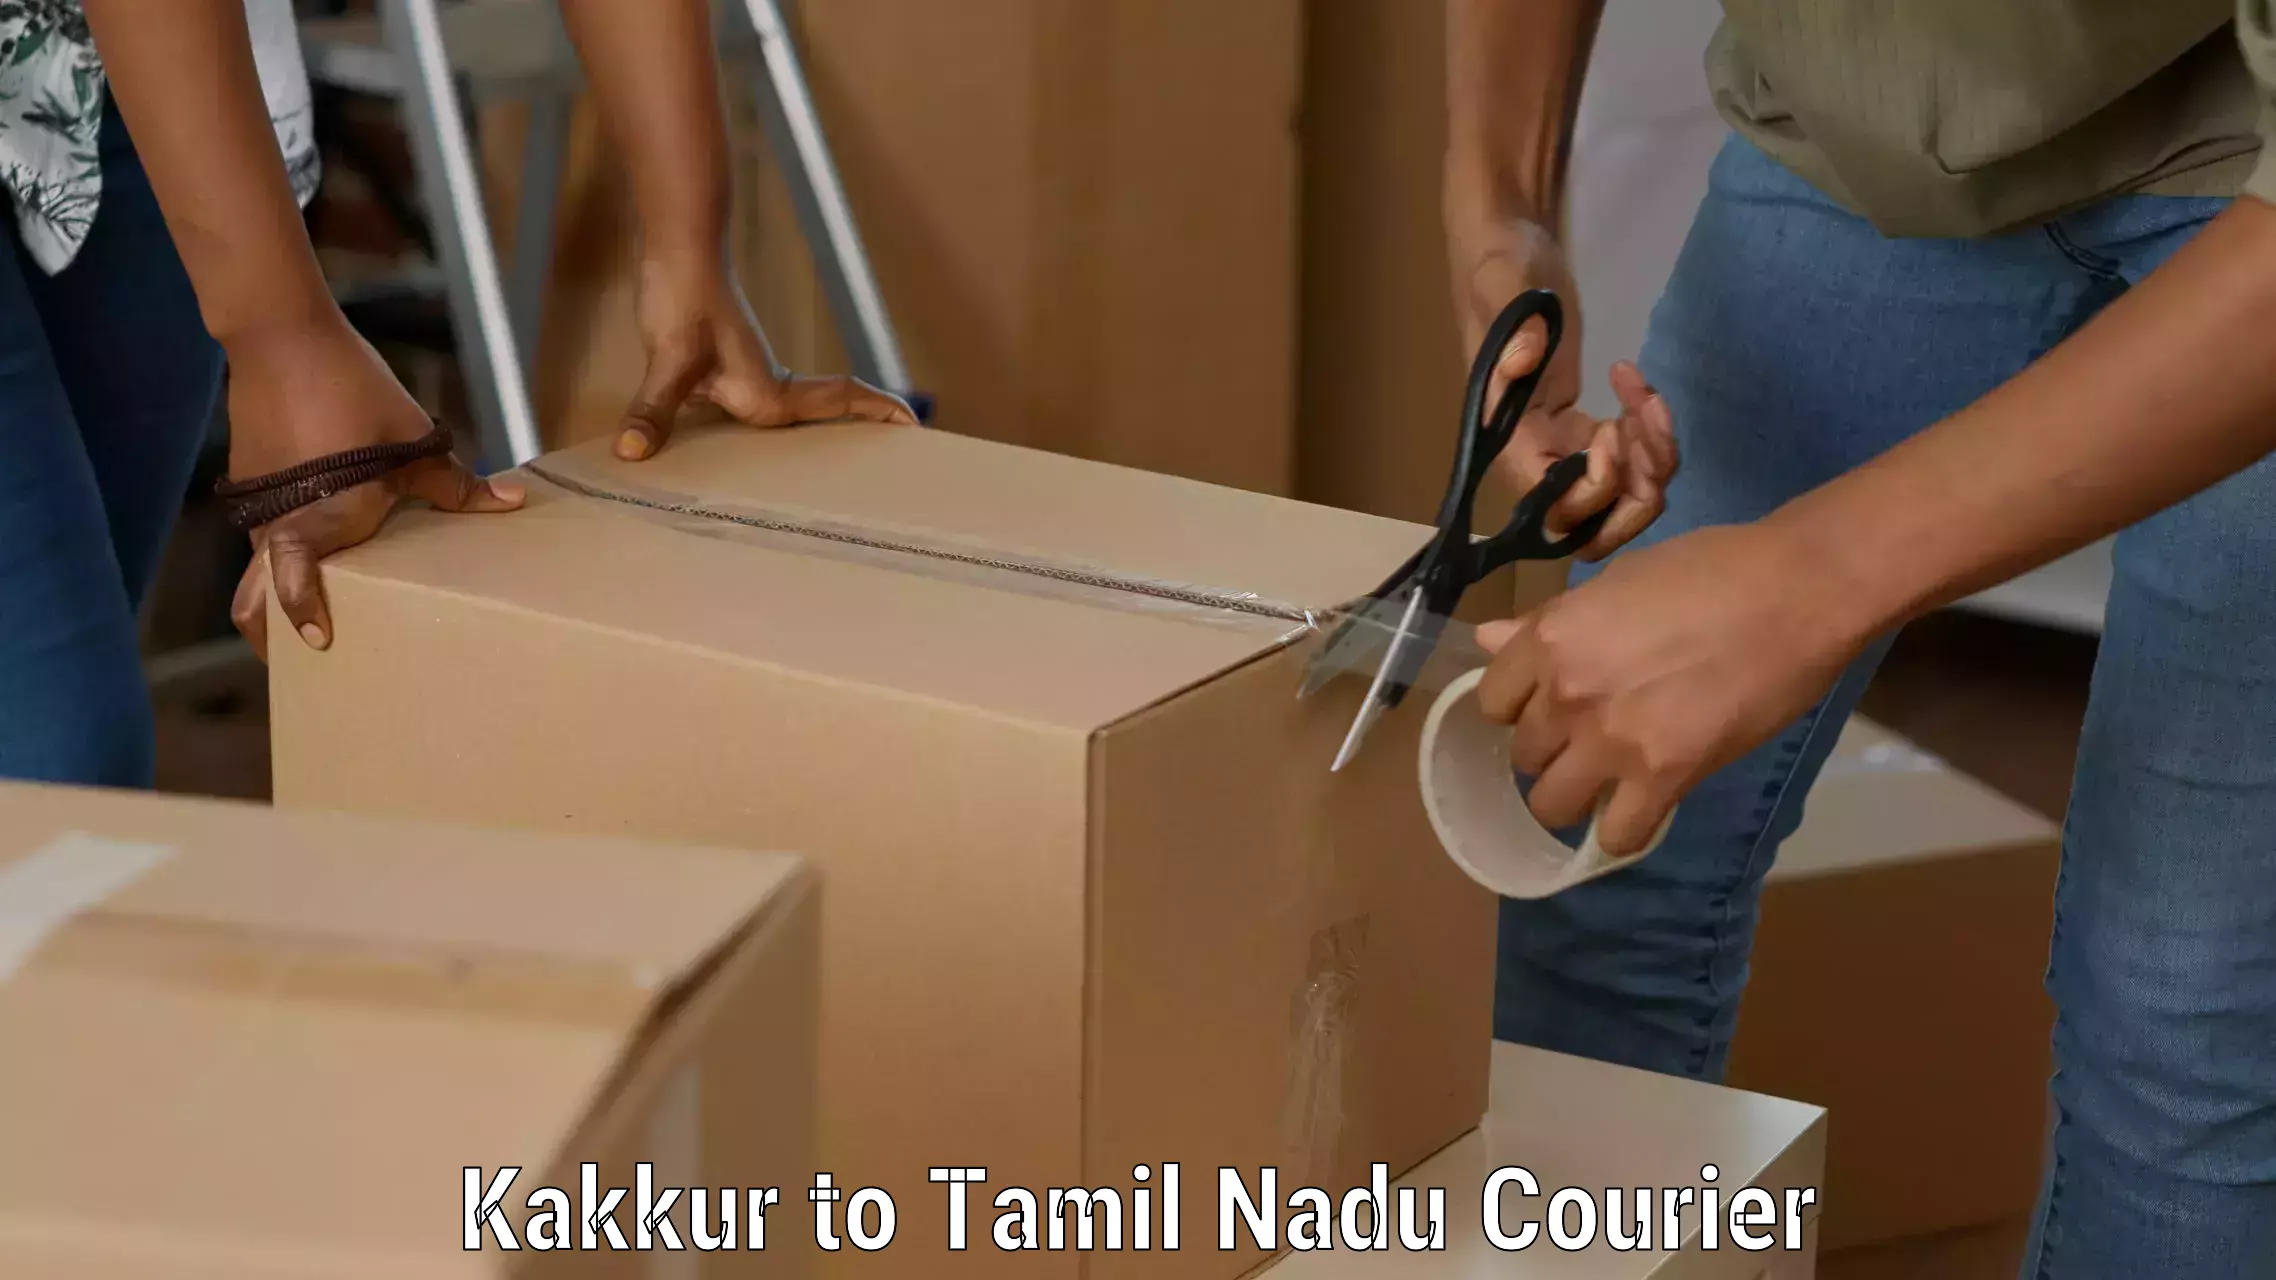 Affordable international shipping in Kakkur to Coimbatore